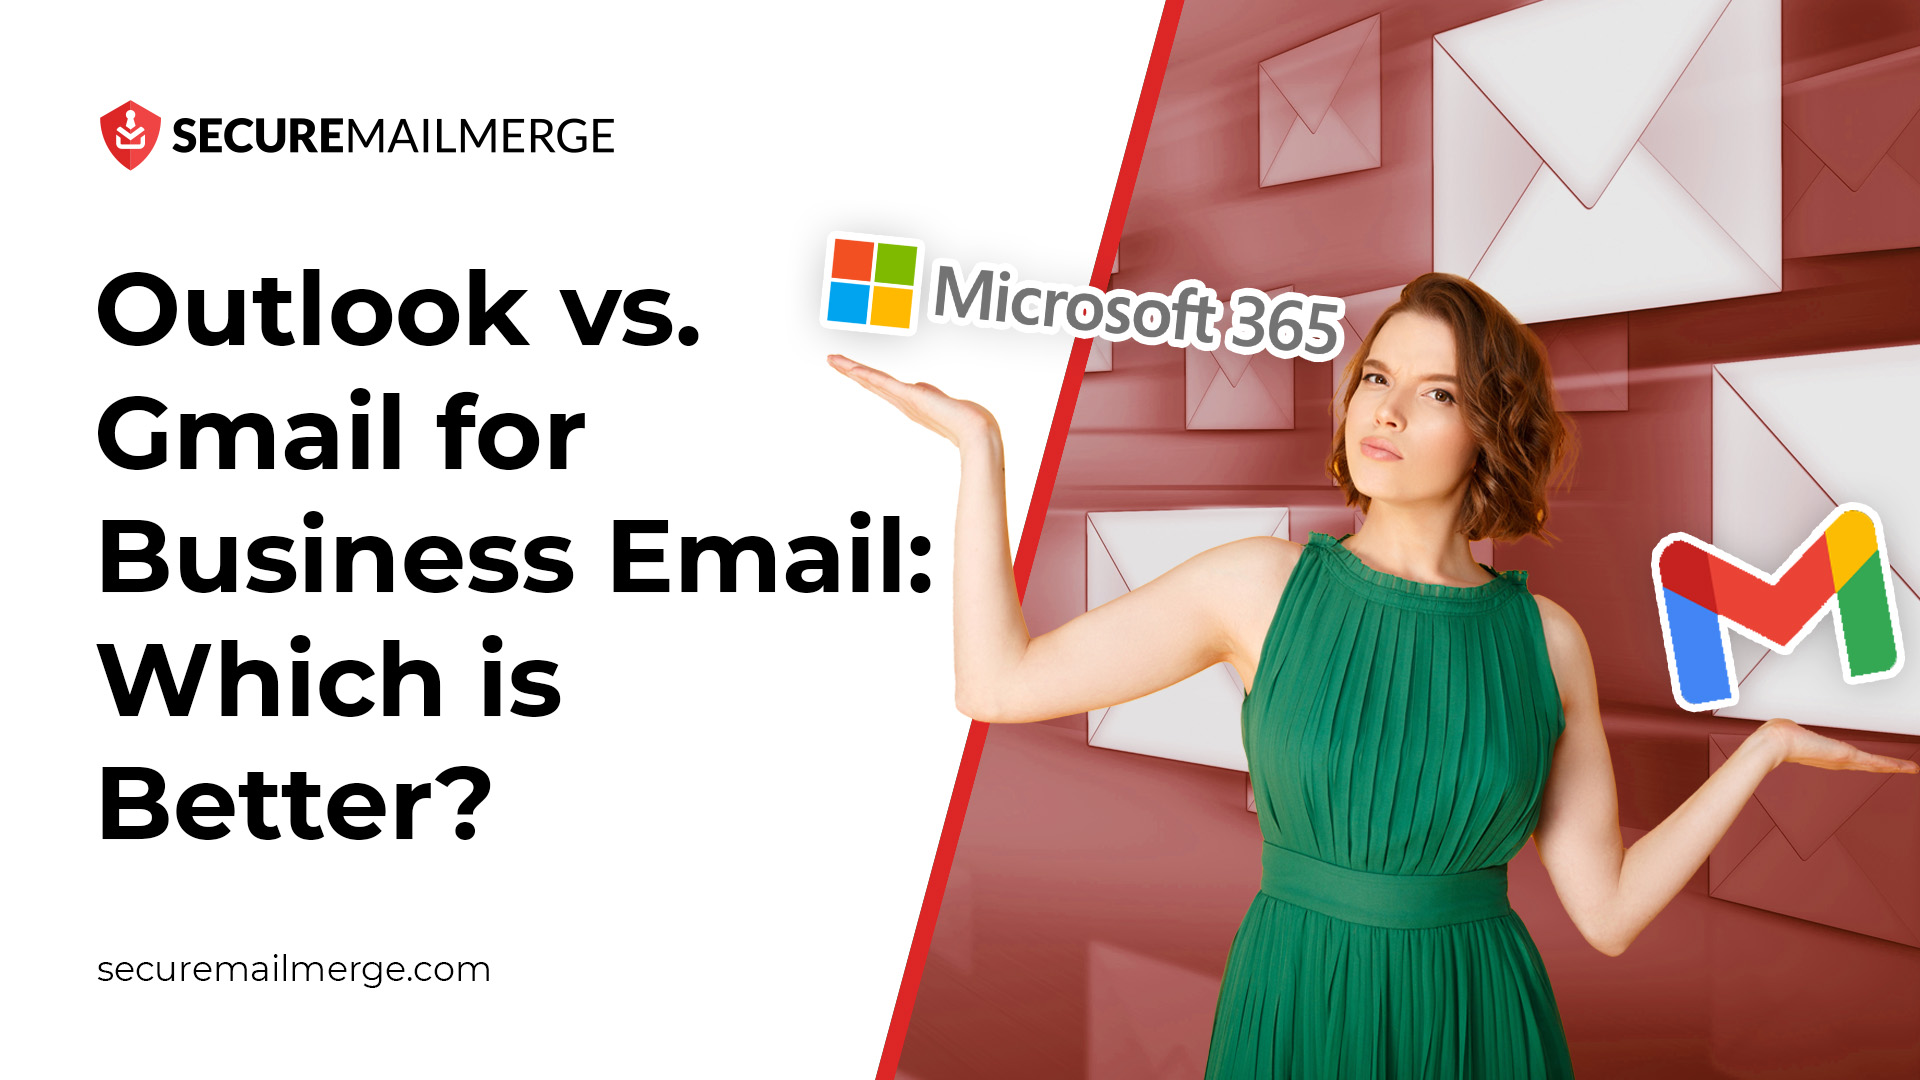 Outlook vs. Gmail for Business Email: Which is Better?